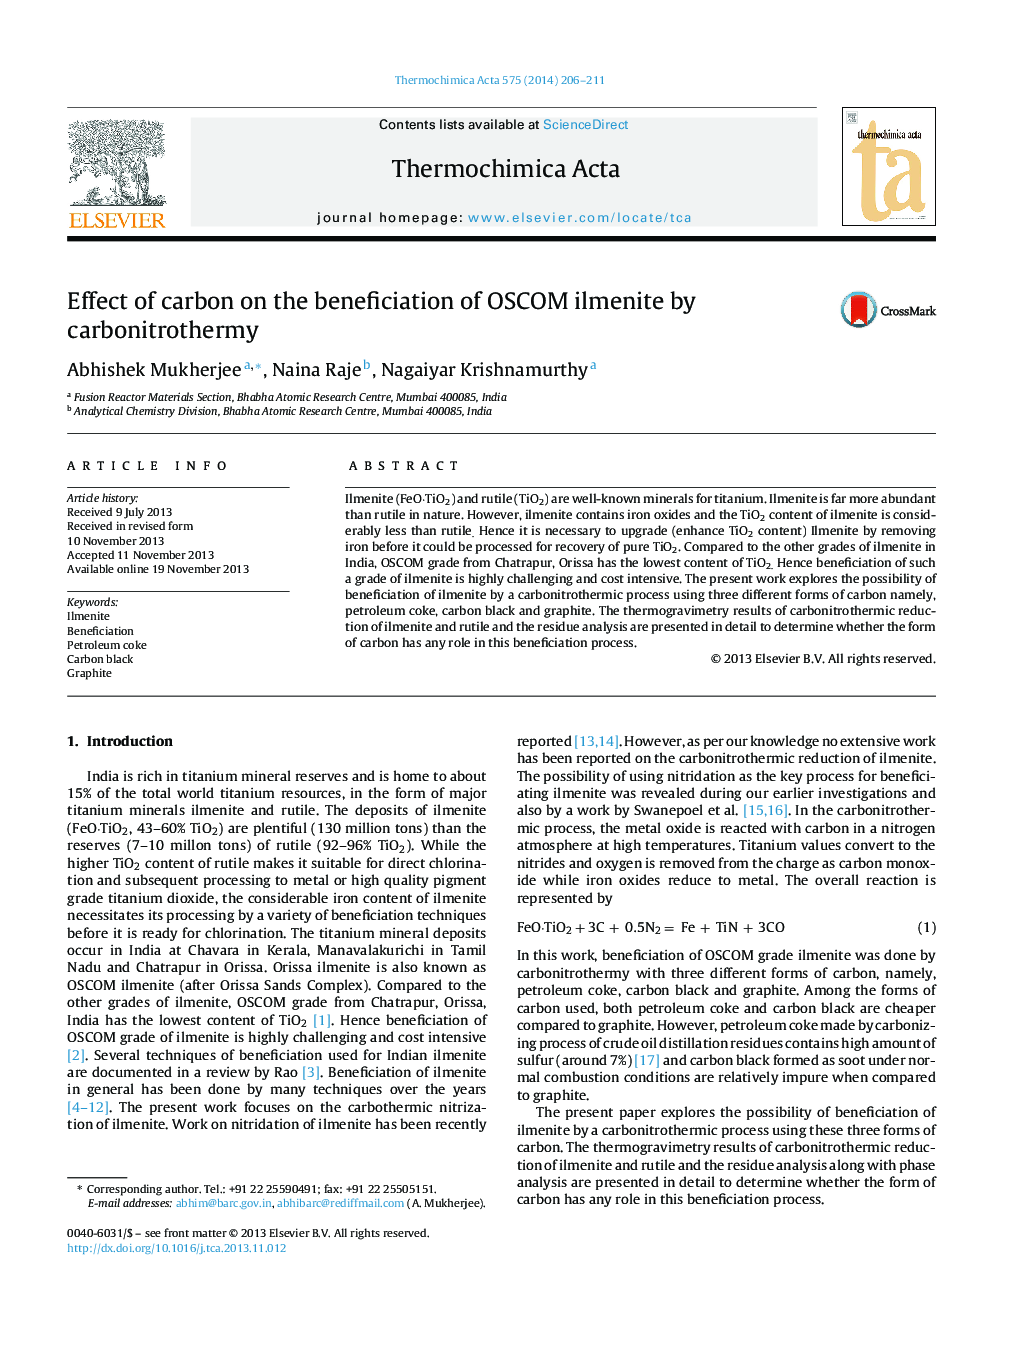 Effect of carbon on the beneficiation of OSCOM ilmenite by carbonitrothermy